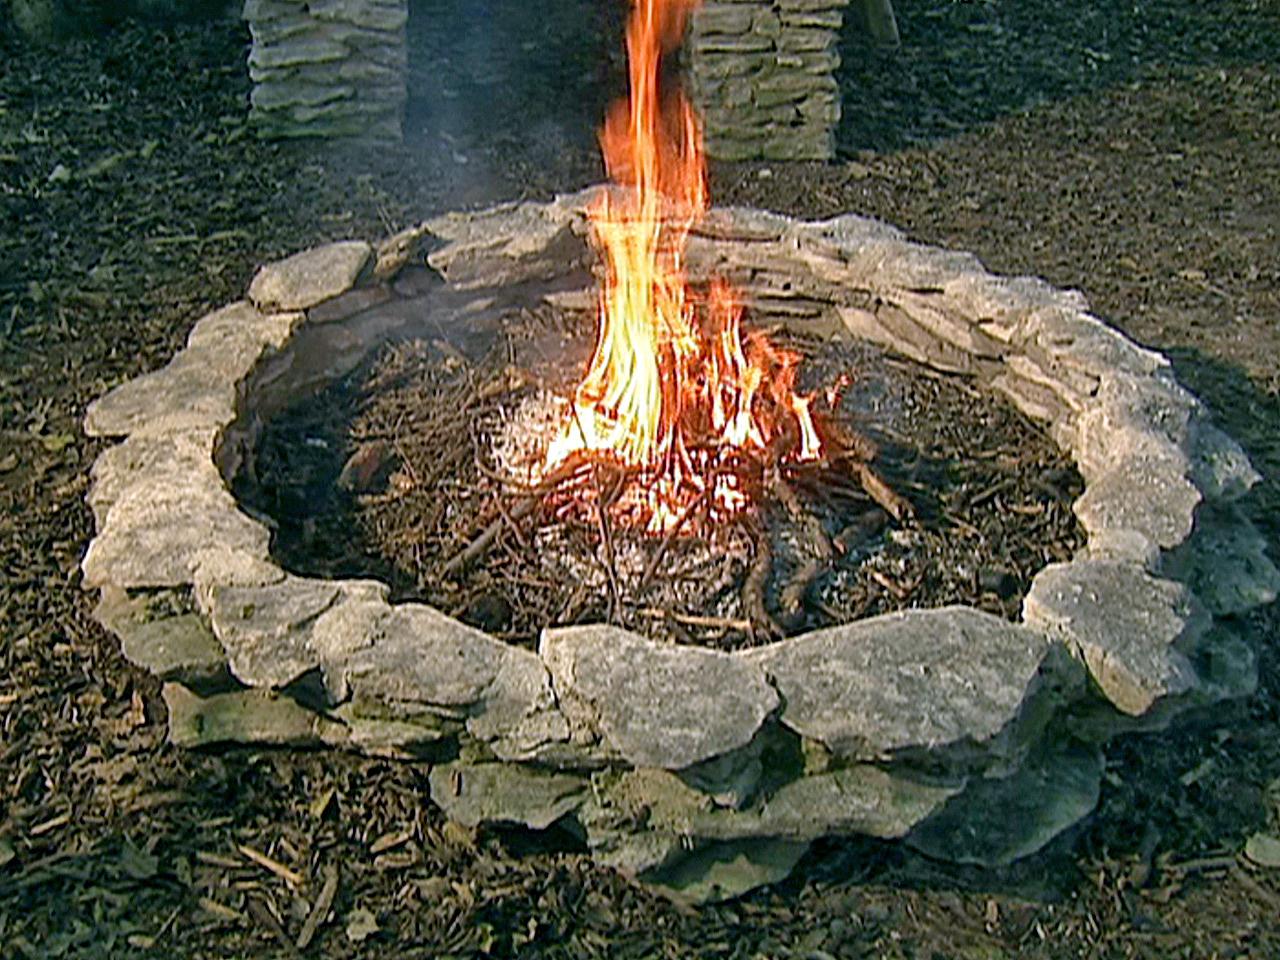 Outdoor Fire Pits And Pit Safety, Do I Need A Screen On My Fire Pit